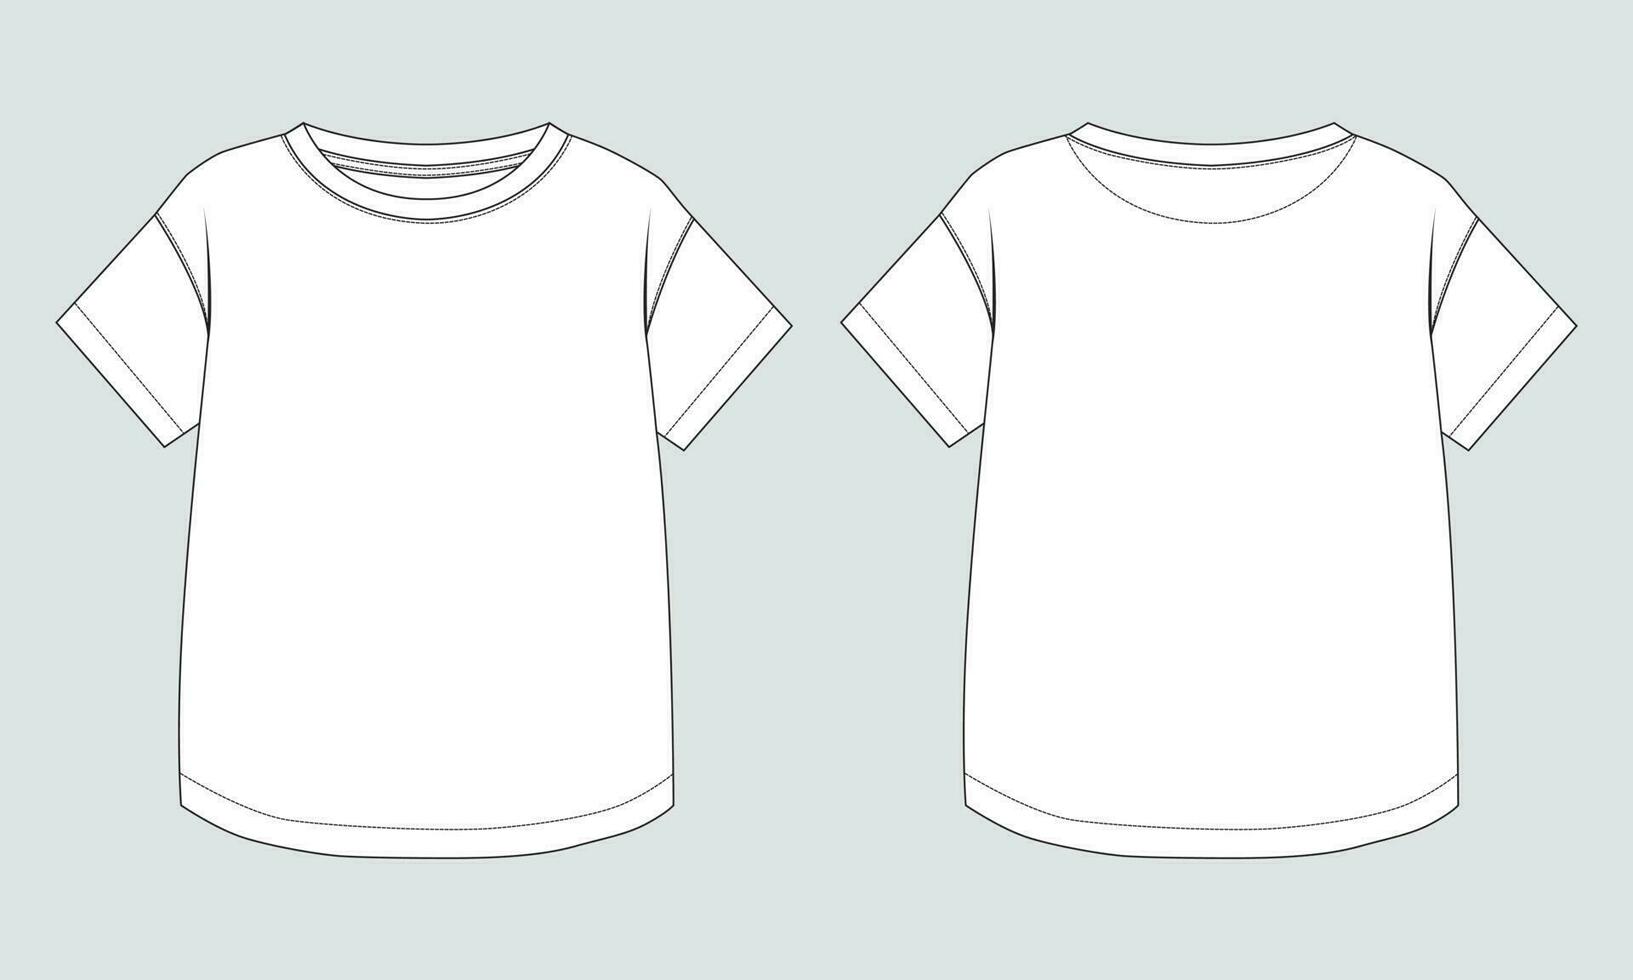 Short sleeve T shirt technical drawing fashion flat sketch vector illustration template for women's front and back views